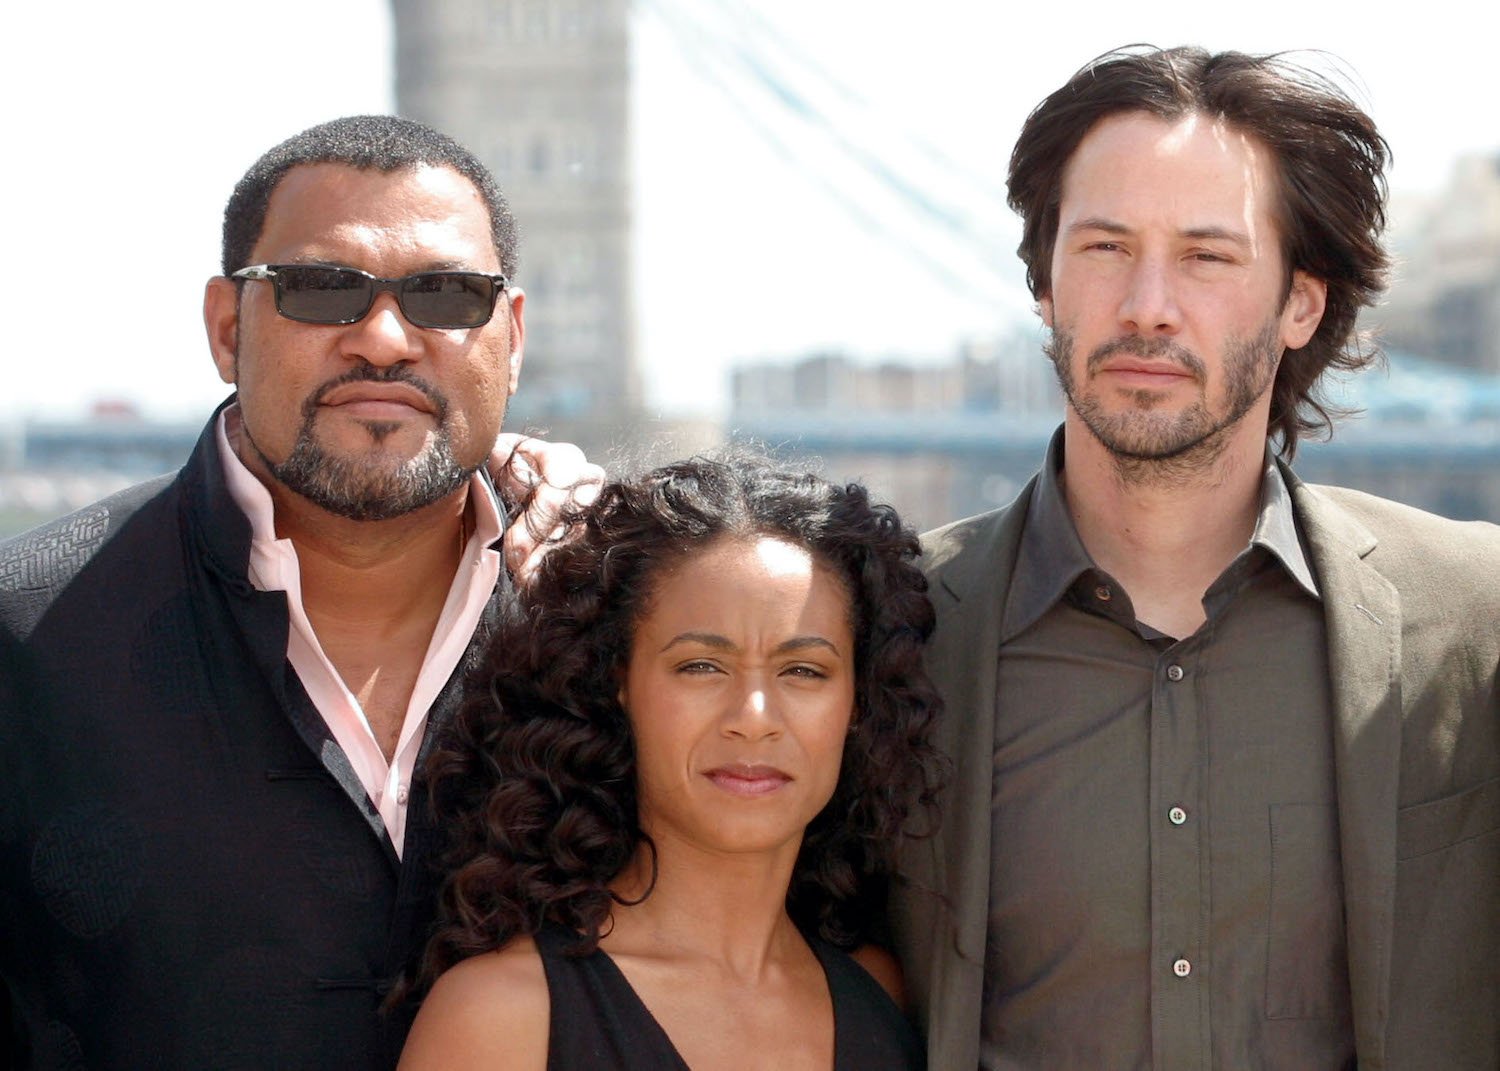 Laurence Fishburne, Jada Pinkett Smith, and Keanu Reeves pose for photographers during a photocall at Old Billingsgate Market in London ahead of the UK premiere of Matrix Reloaded